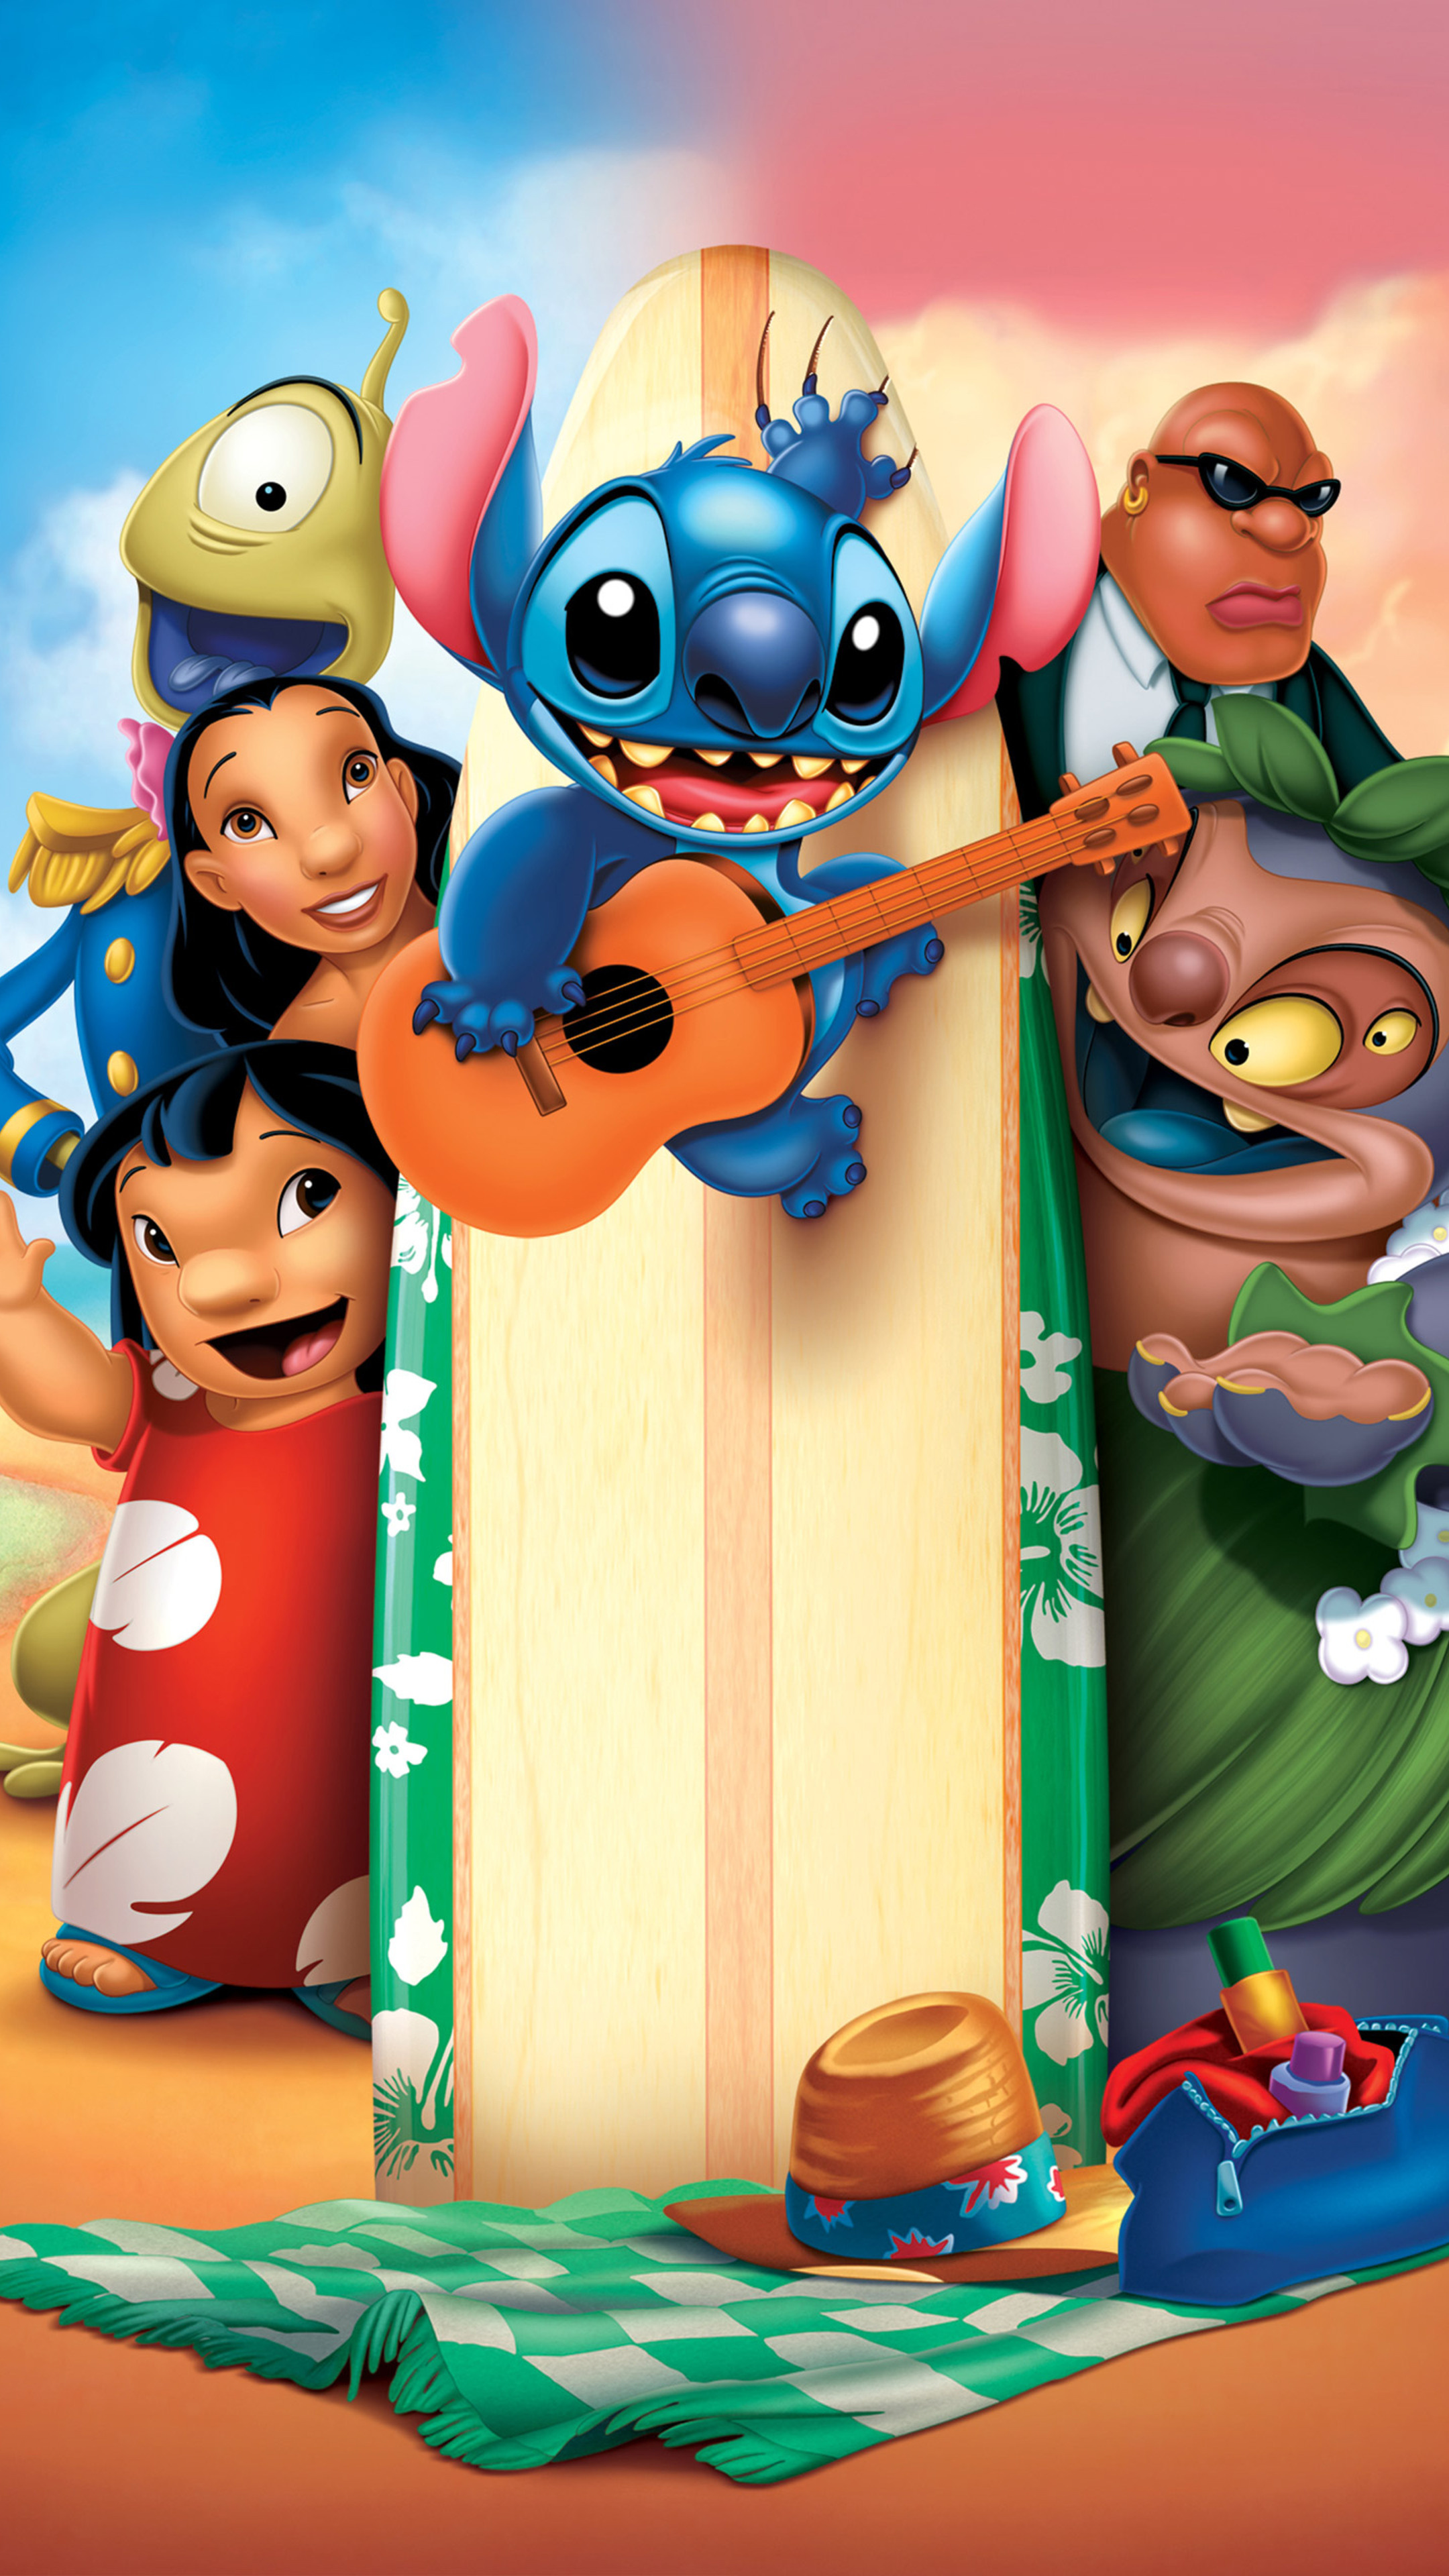 Stitch animation, Lilo and Stitch movie, Sony Xperia wallpapers, HD 4K wallpapers, 2160x3840 4K Handy